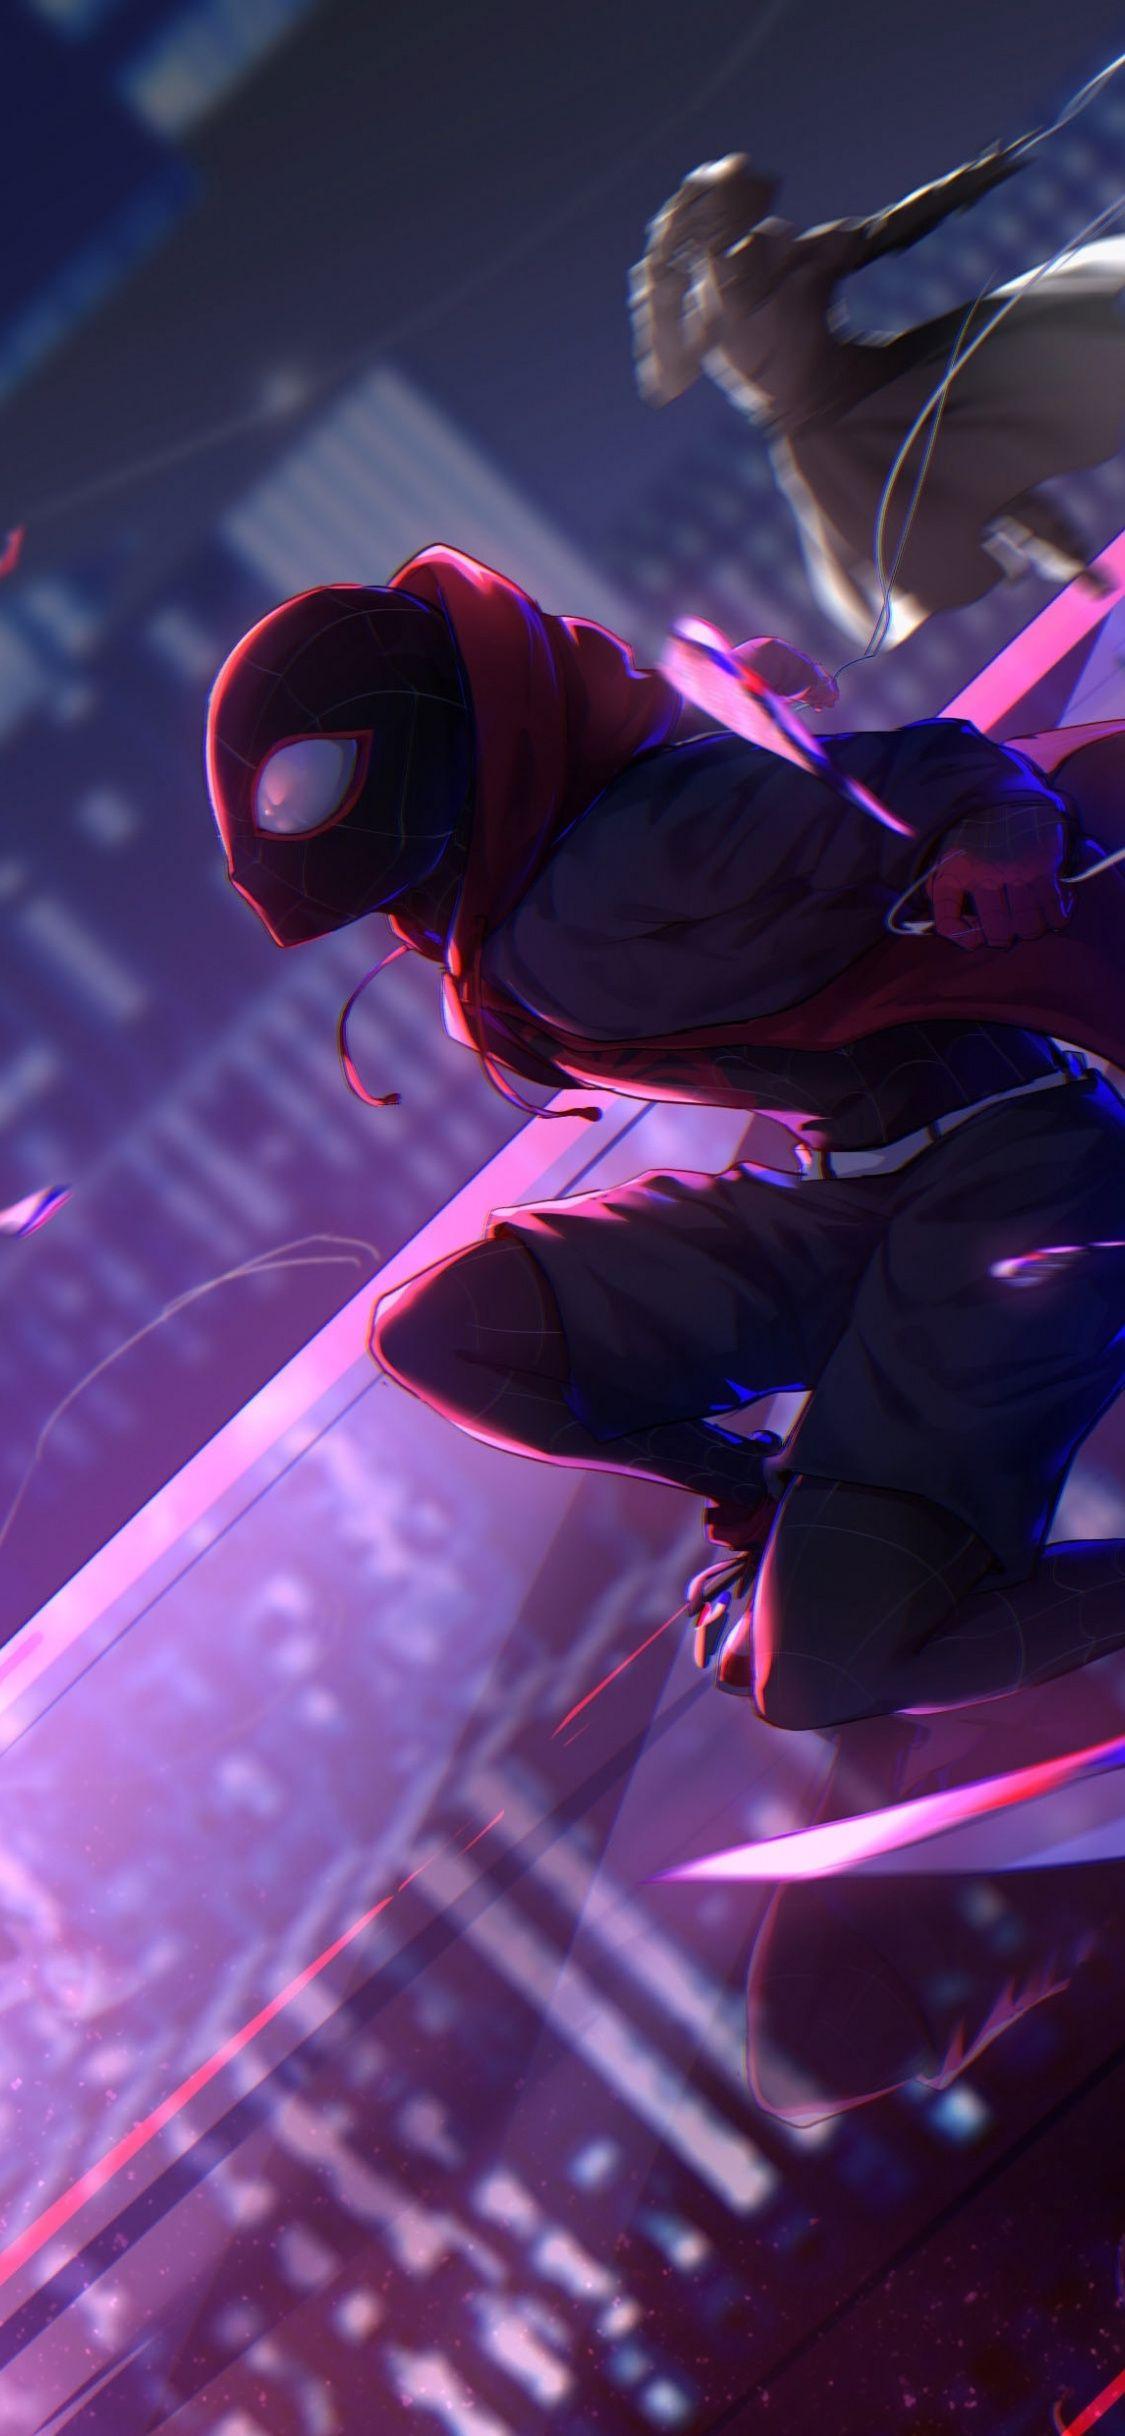 Spider Man Miles morales high quality wallpaper  changed some colors and  upscaled image quality  iPhone Wallpapers  9GAG